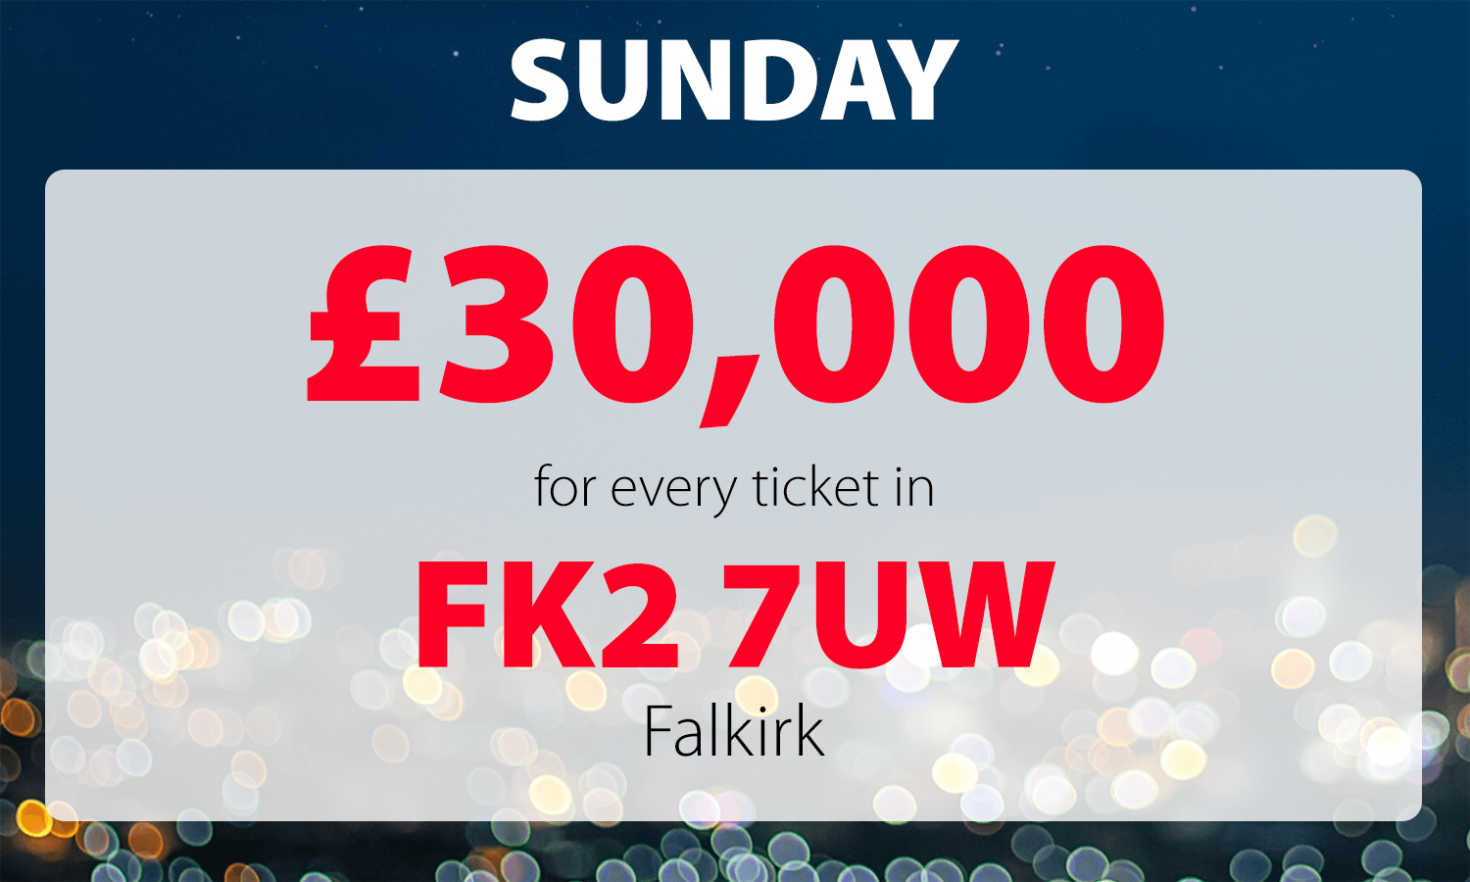 One Falkirk player has picked up £30,000